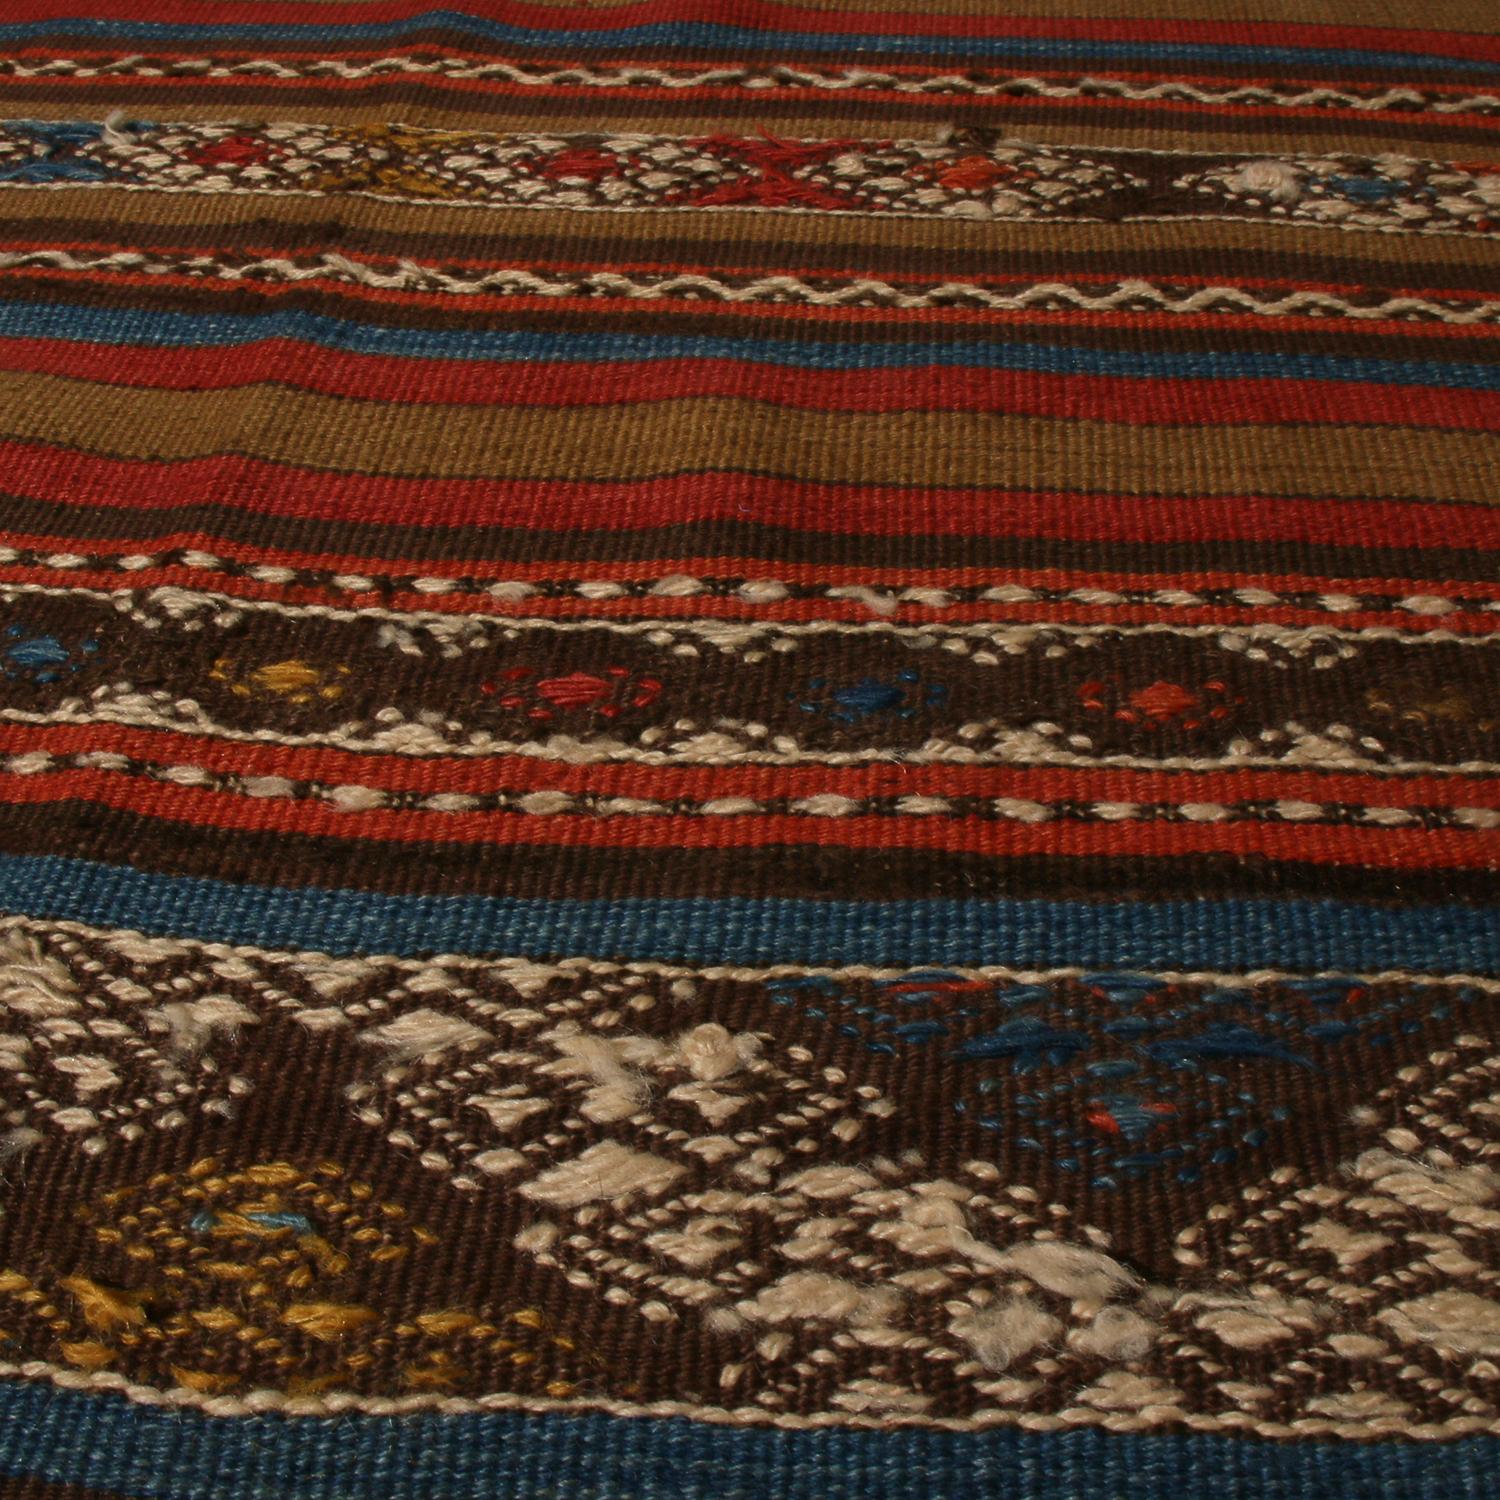 Hand-Woven Bergama Geometric Brown and Red Wool Kilim Rug with Blue and White Accents